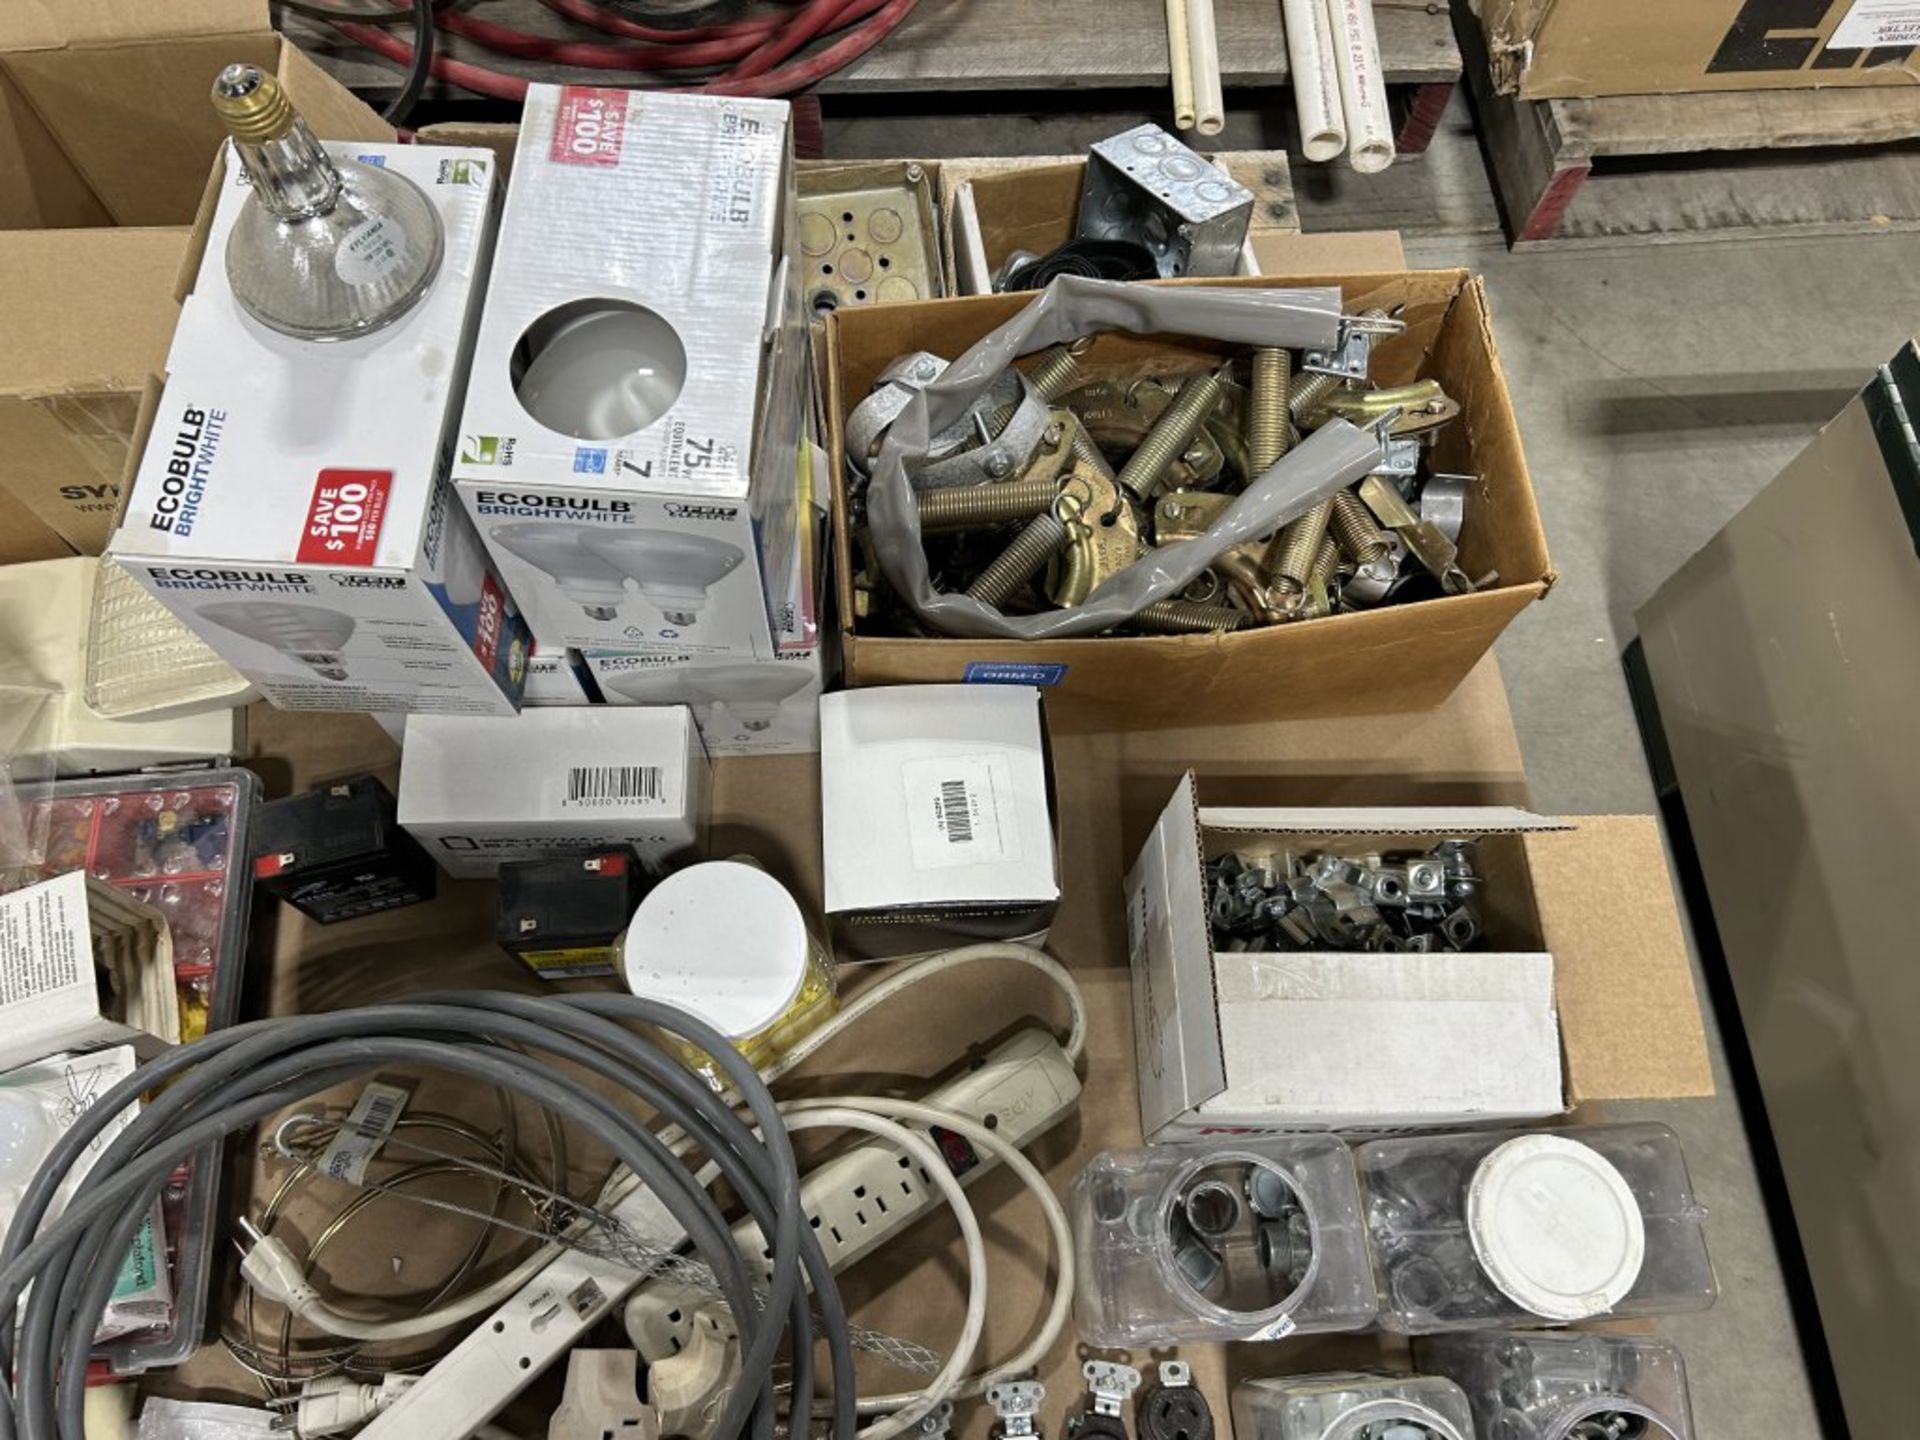 LARGE PALLET FULL OF ASSORTED FUSES, SWITCHES, OUTLETS, LIGHT BULBS, SPRINGS, ETC. - Image 6 of 7